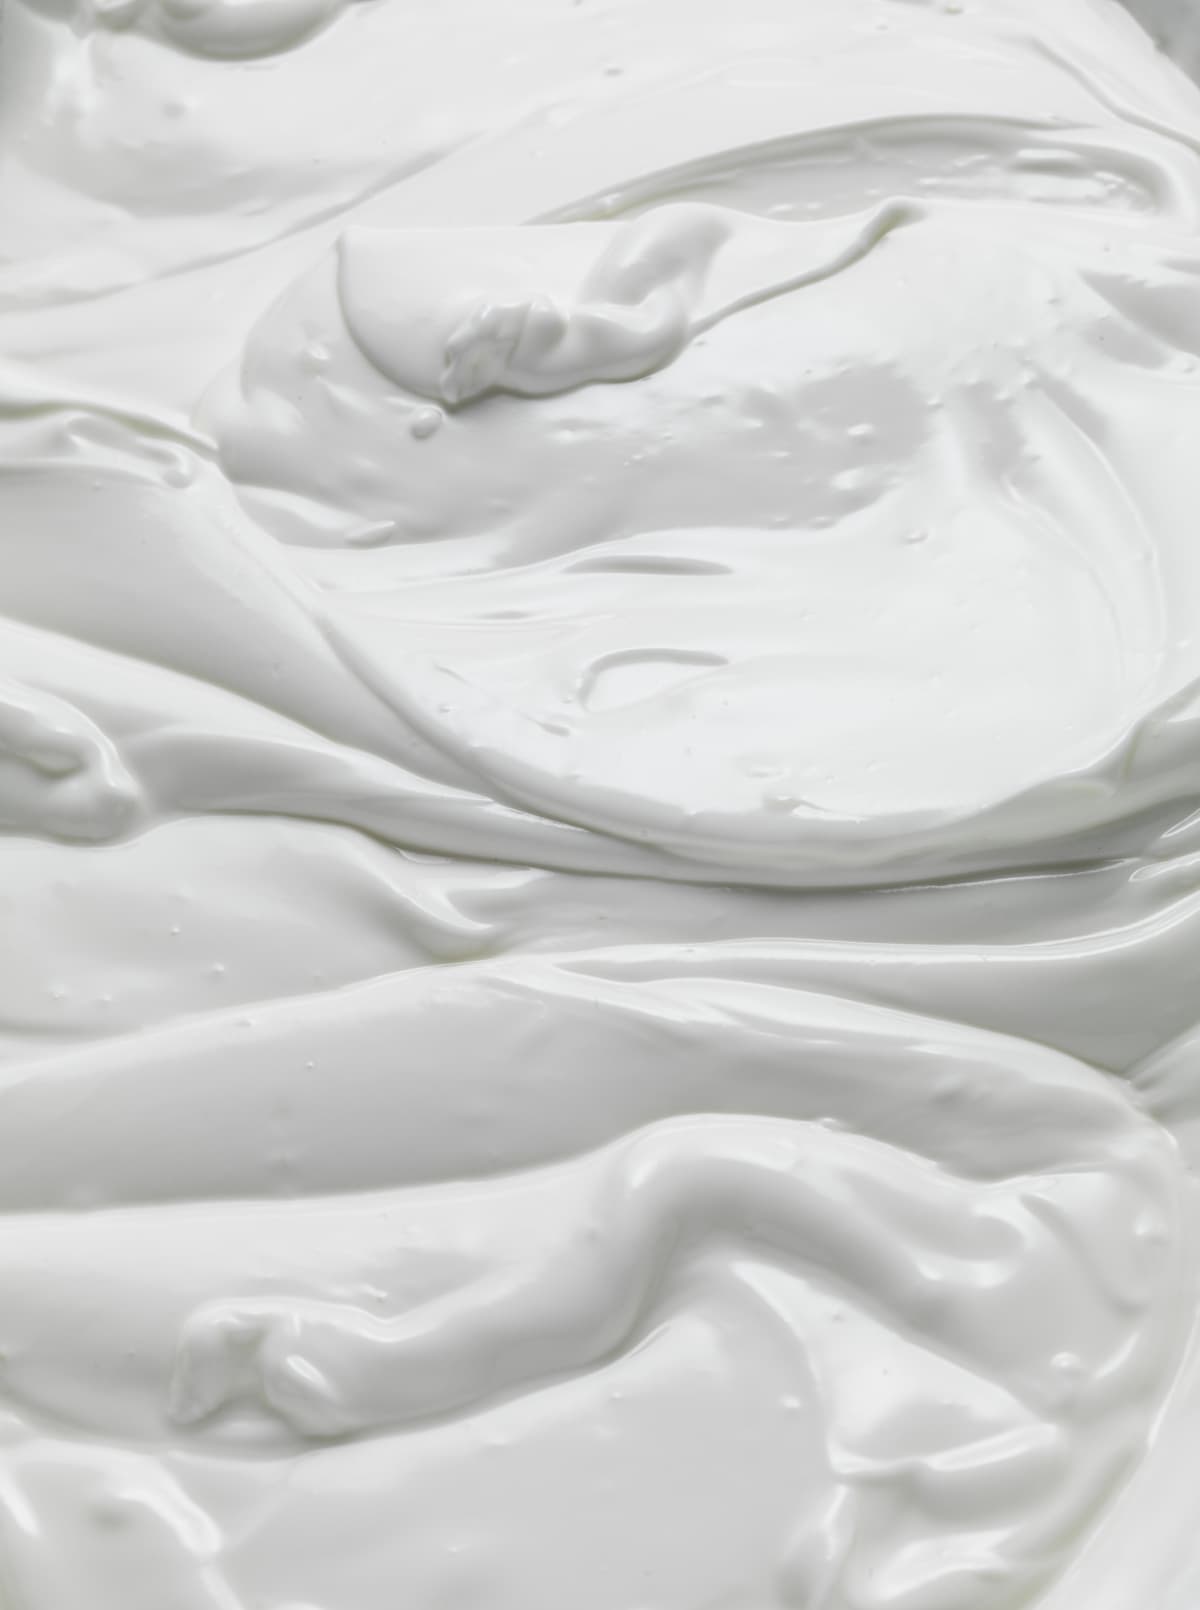 Whipped cream being made.